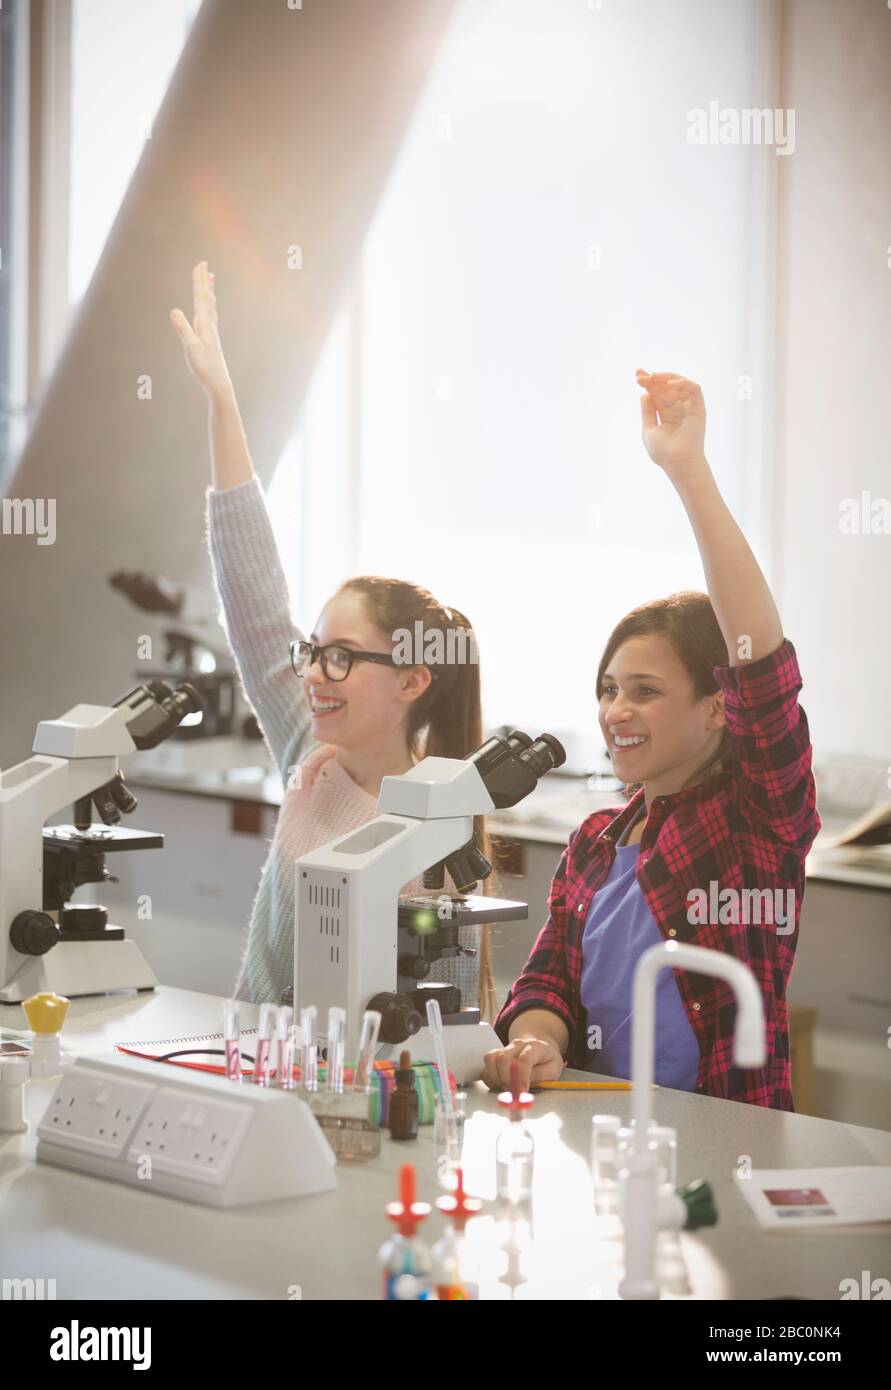 Eager girl students raising arms behind microscopes in laboratory classroom Stock Photo